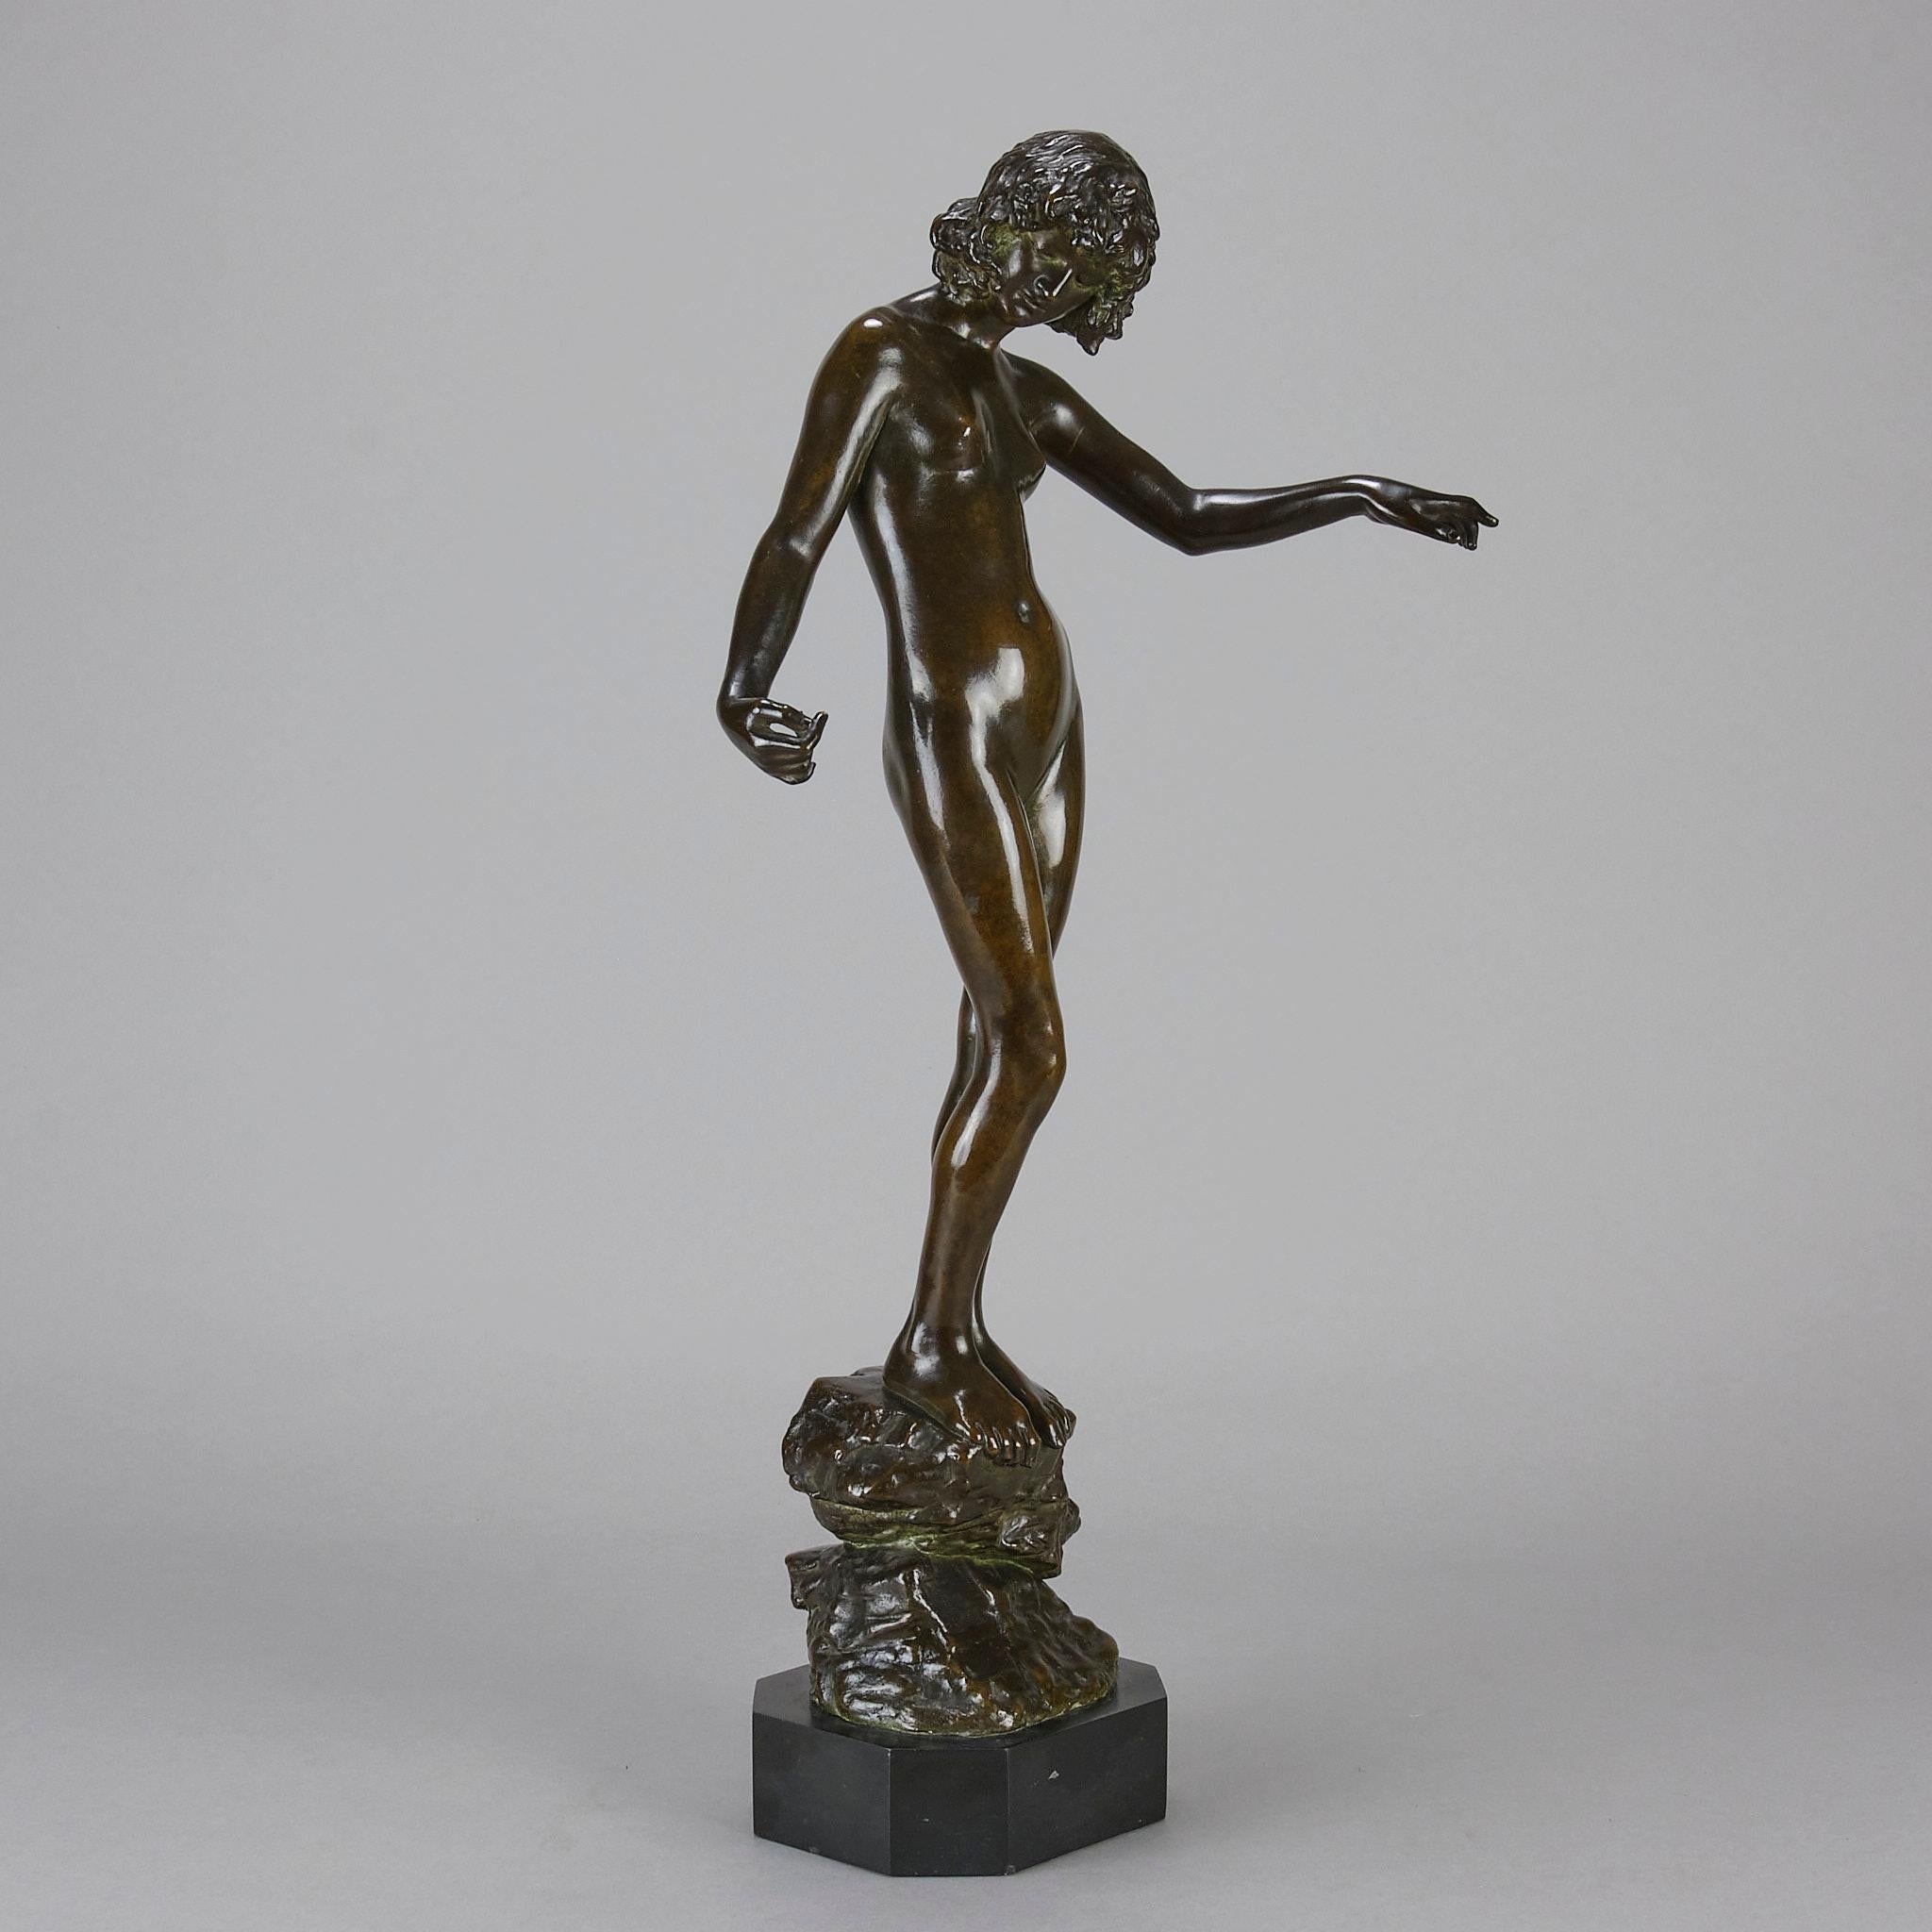 Hand-Carved Early 20th Century Art Nouveau Bronze sculpture entitled 